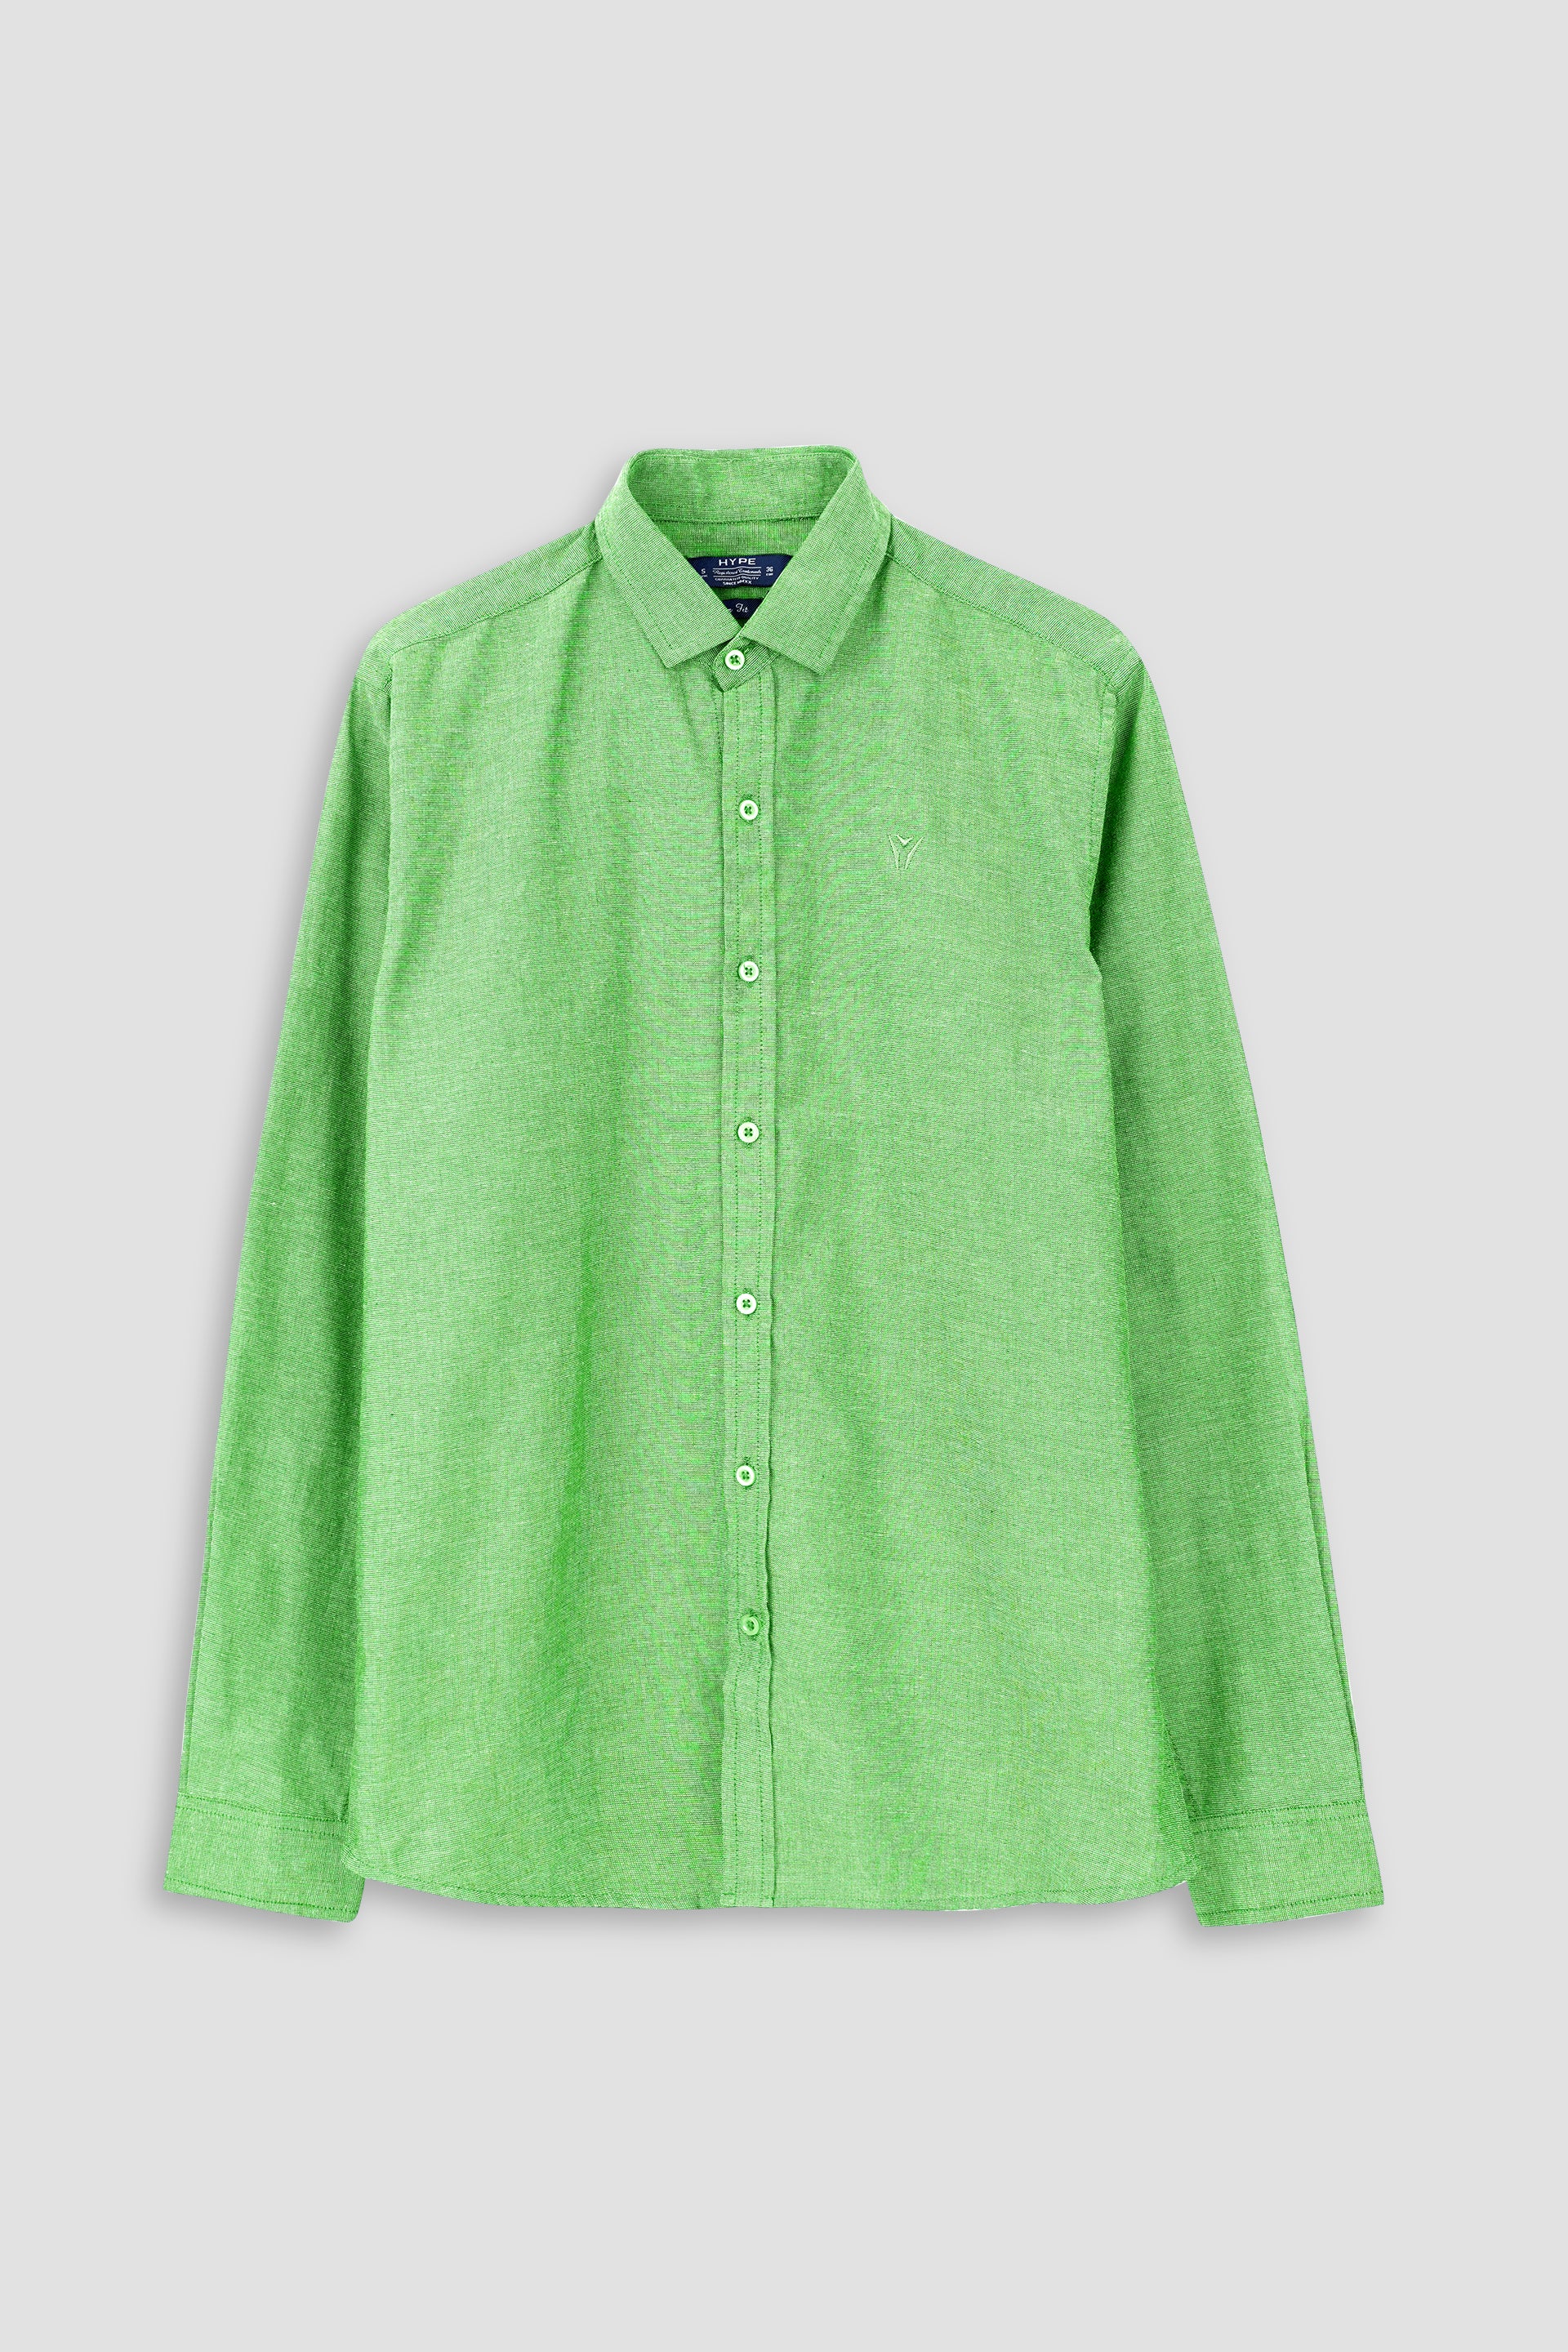 Embroidered  Soft Cotton Casual Shirt 002364